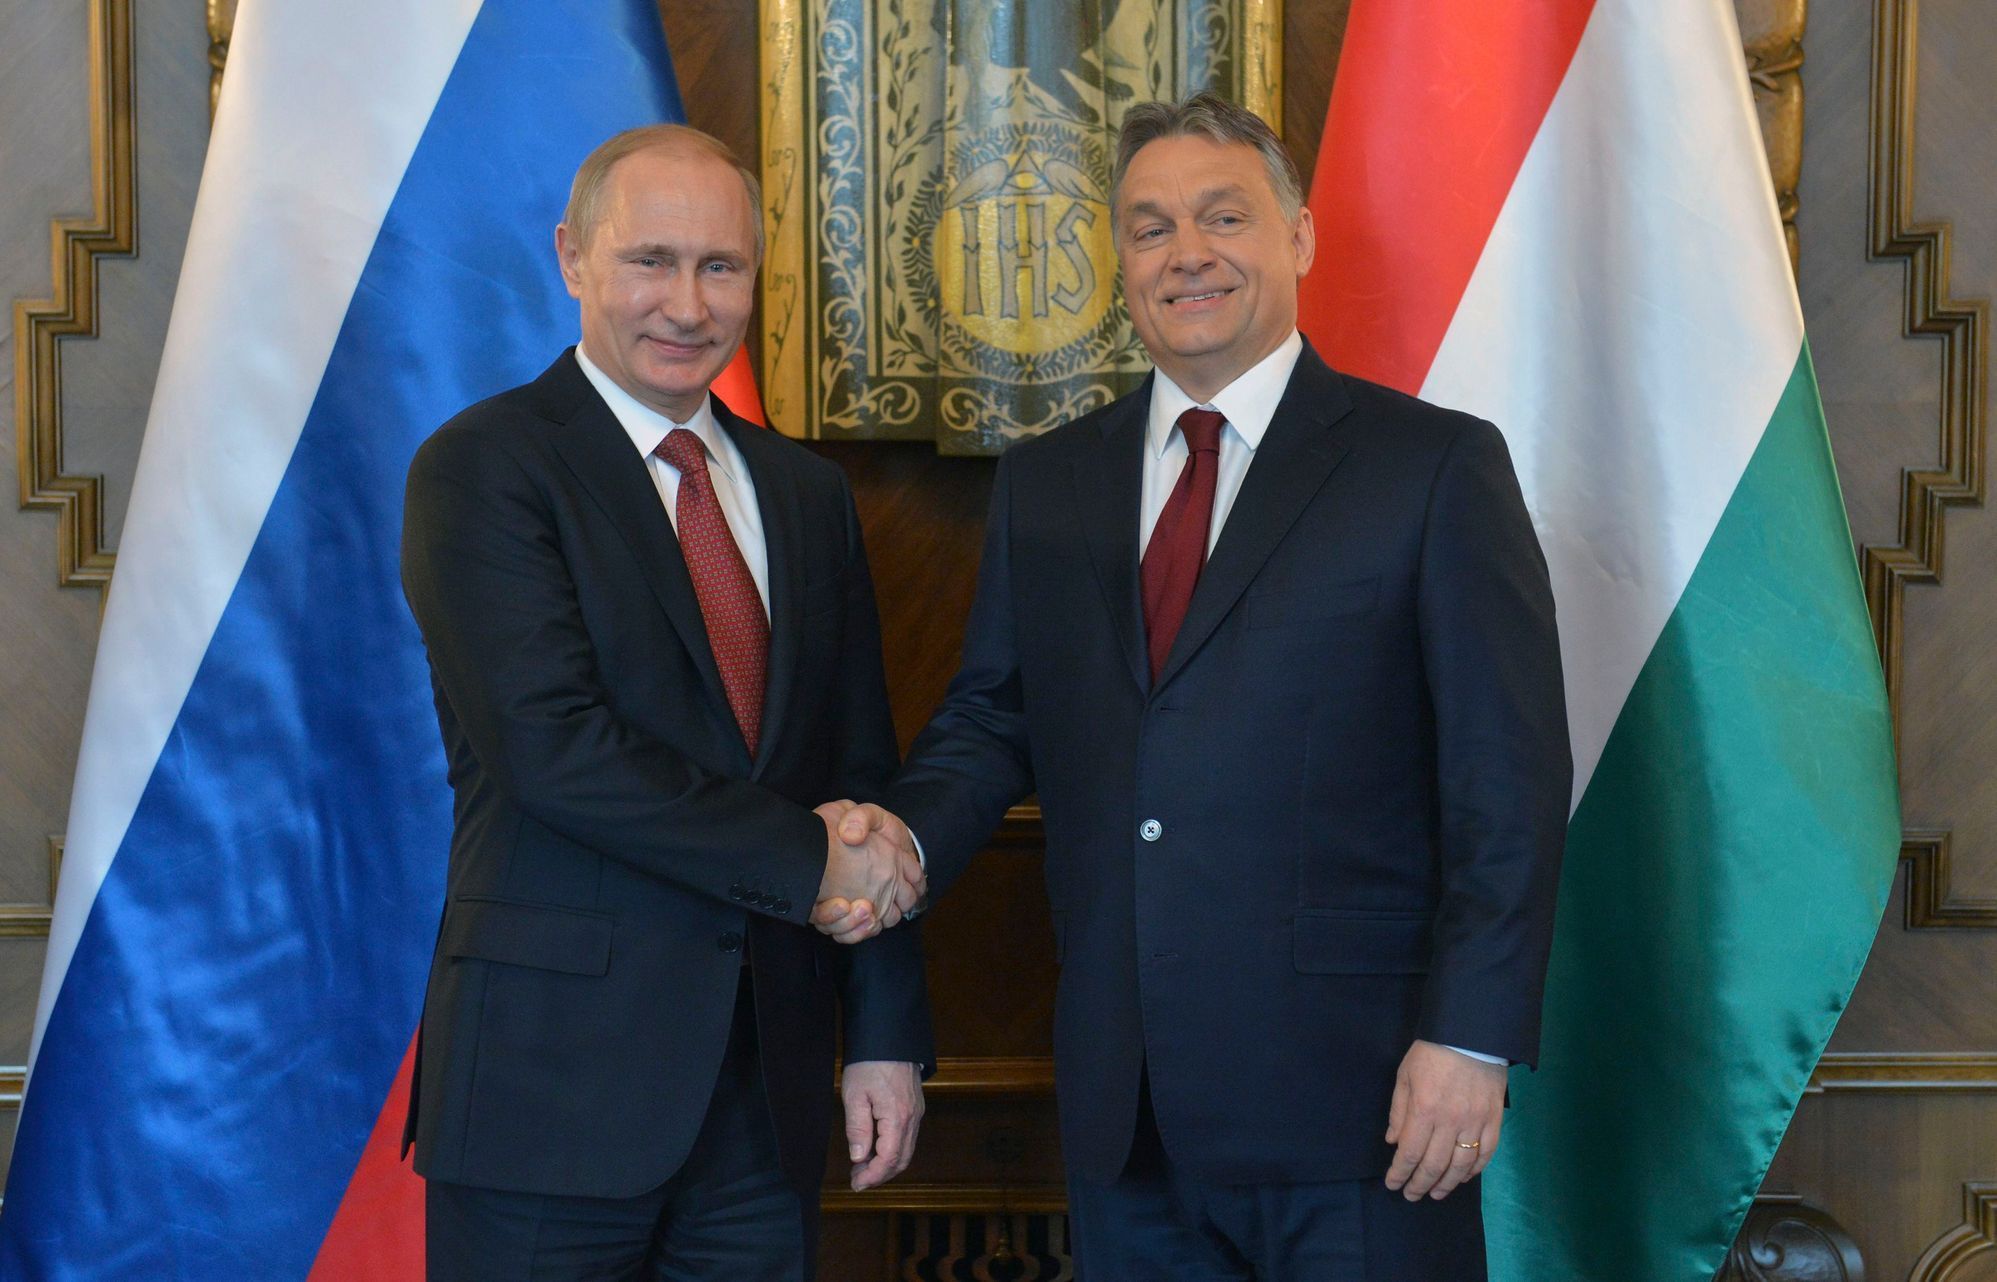 Russia's President Putin shakes hands with Hungarian Prime Minister Orban during their meeting in Budapest